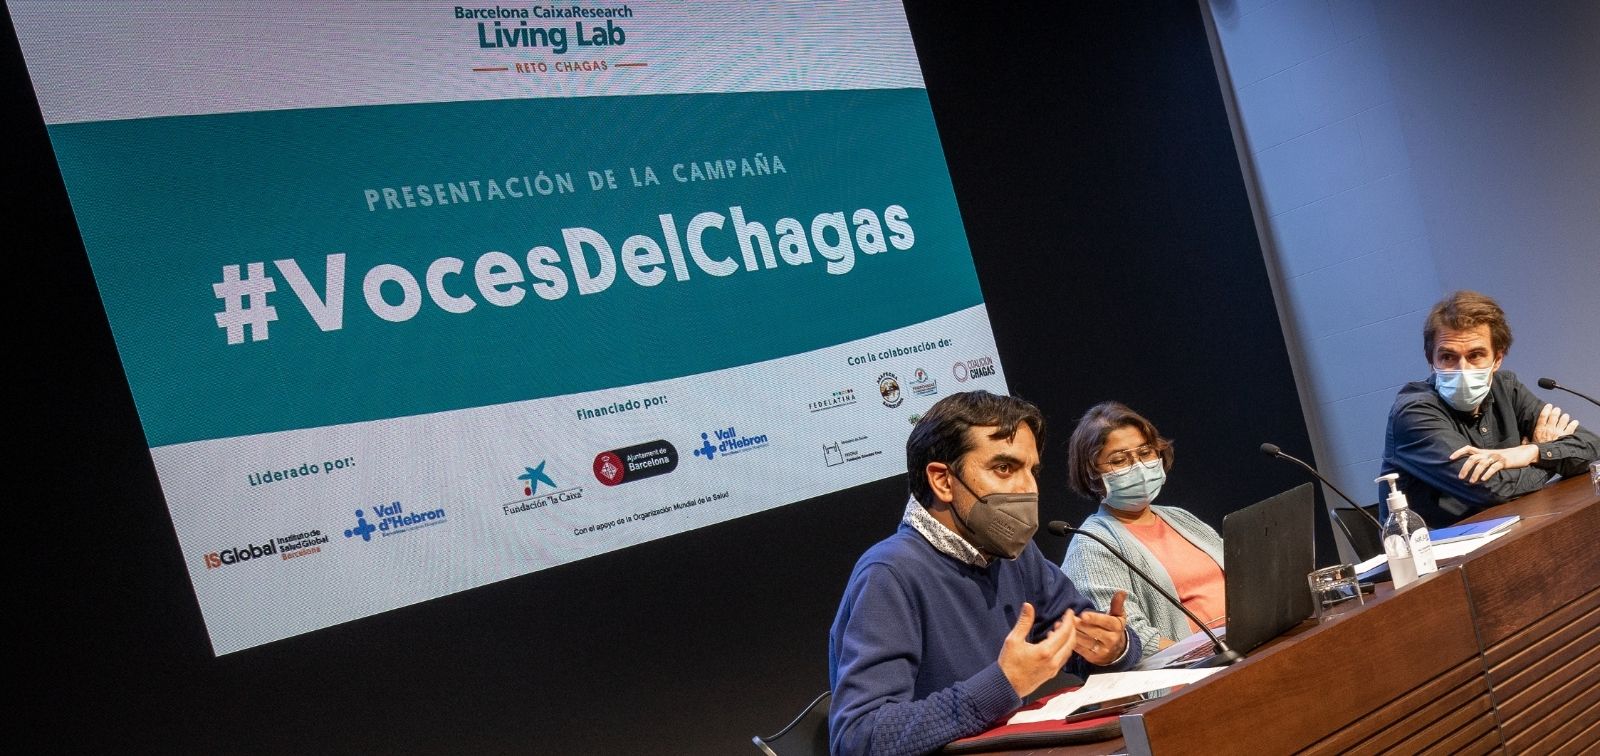 The Chagas Challenge within Barcelona CaixaResearch Living Lab comes to an end